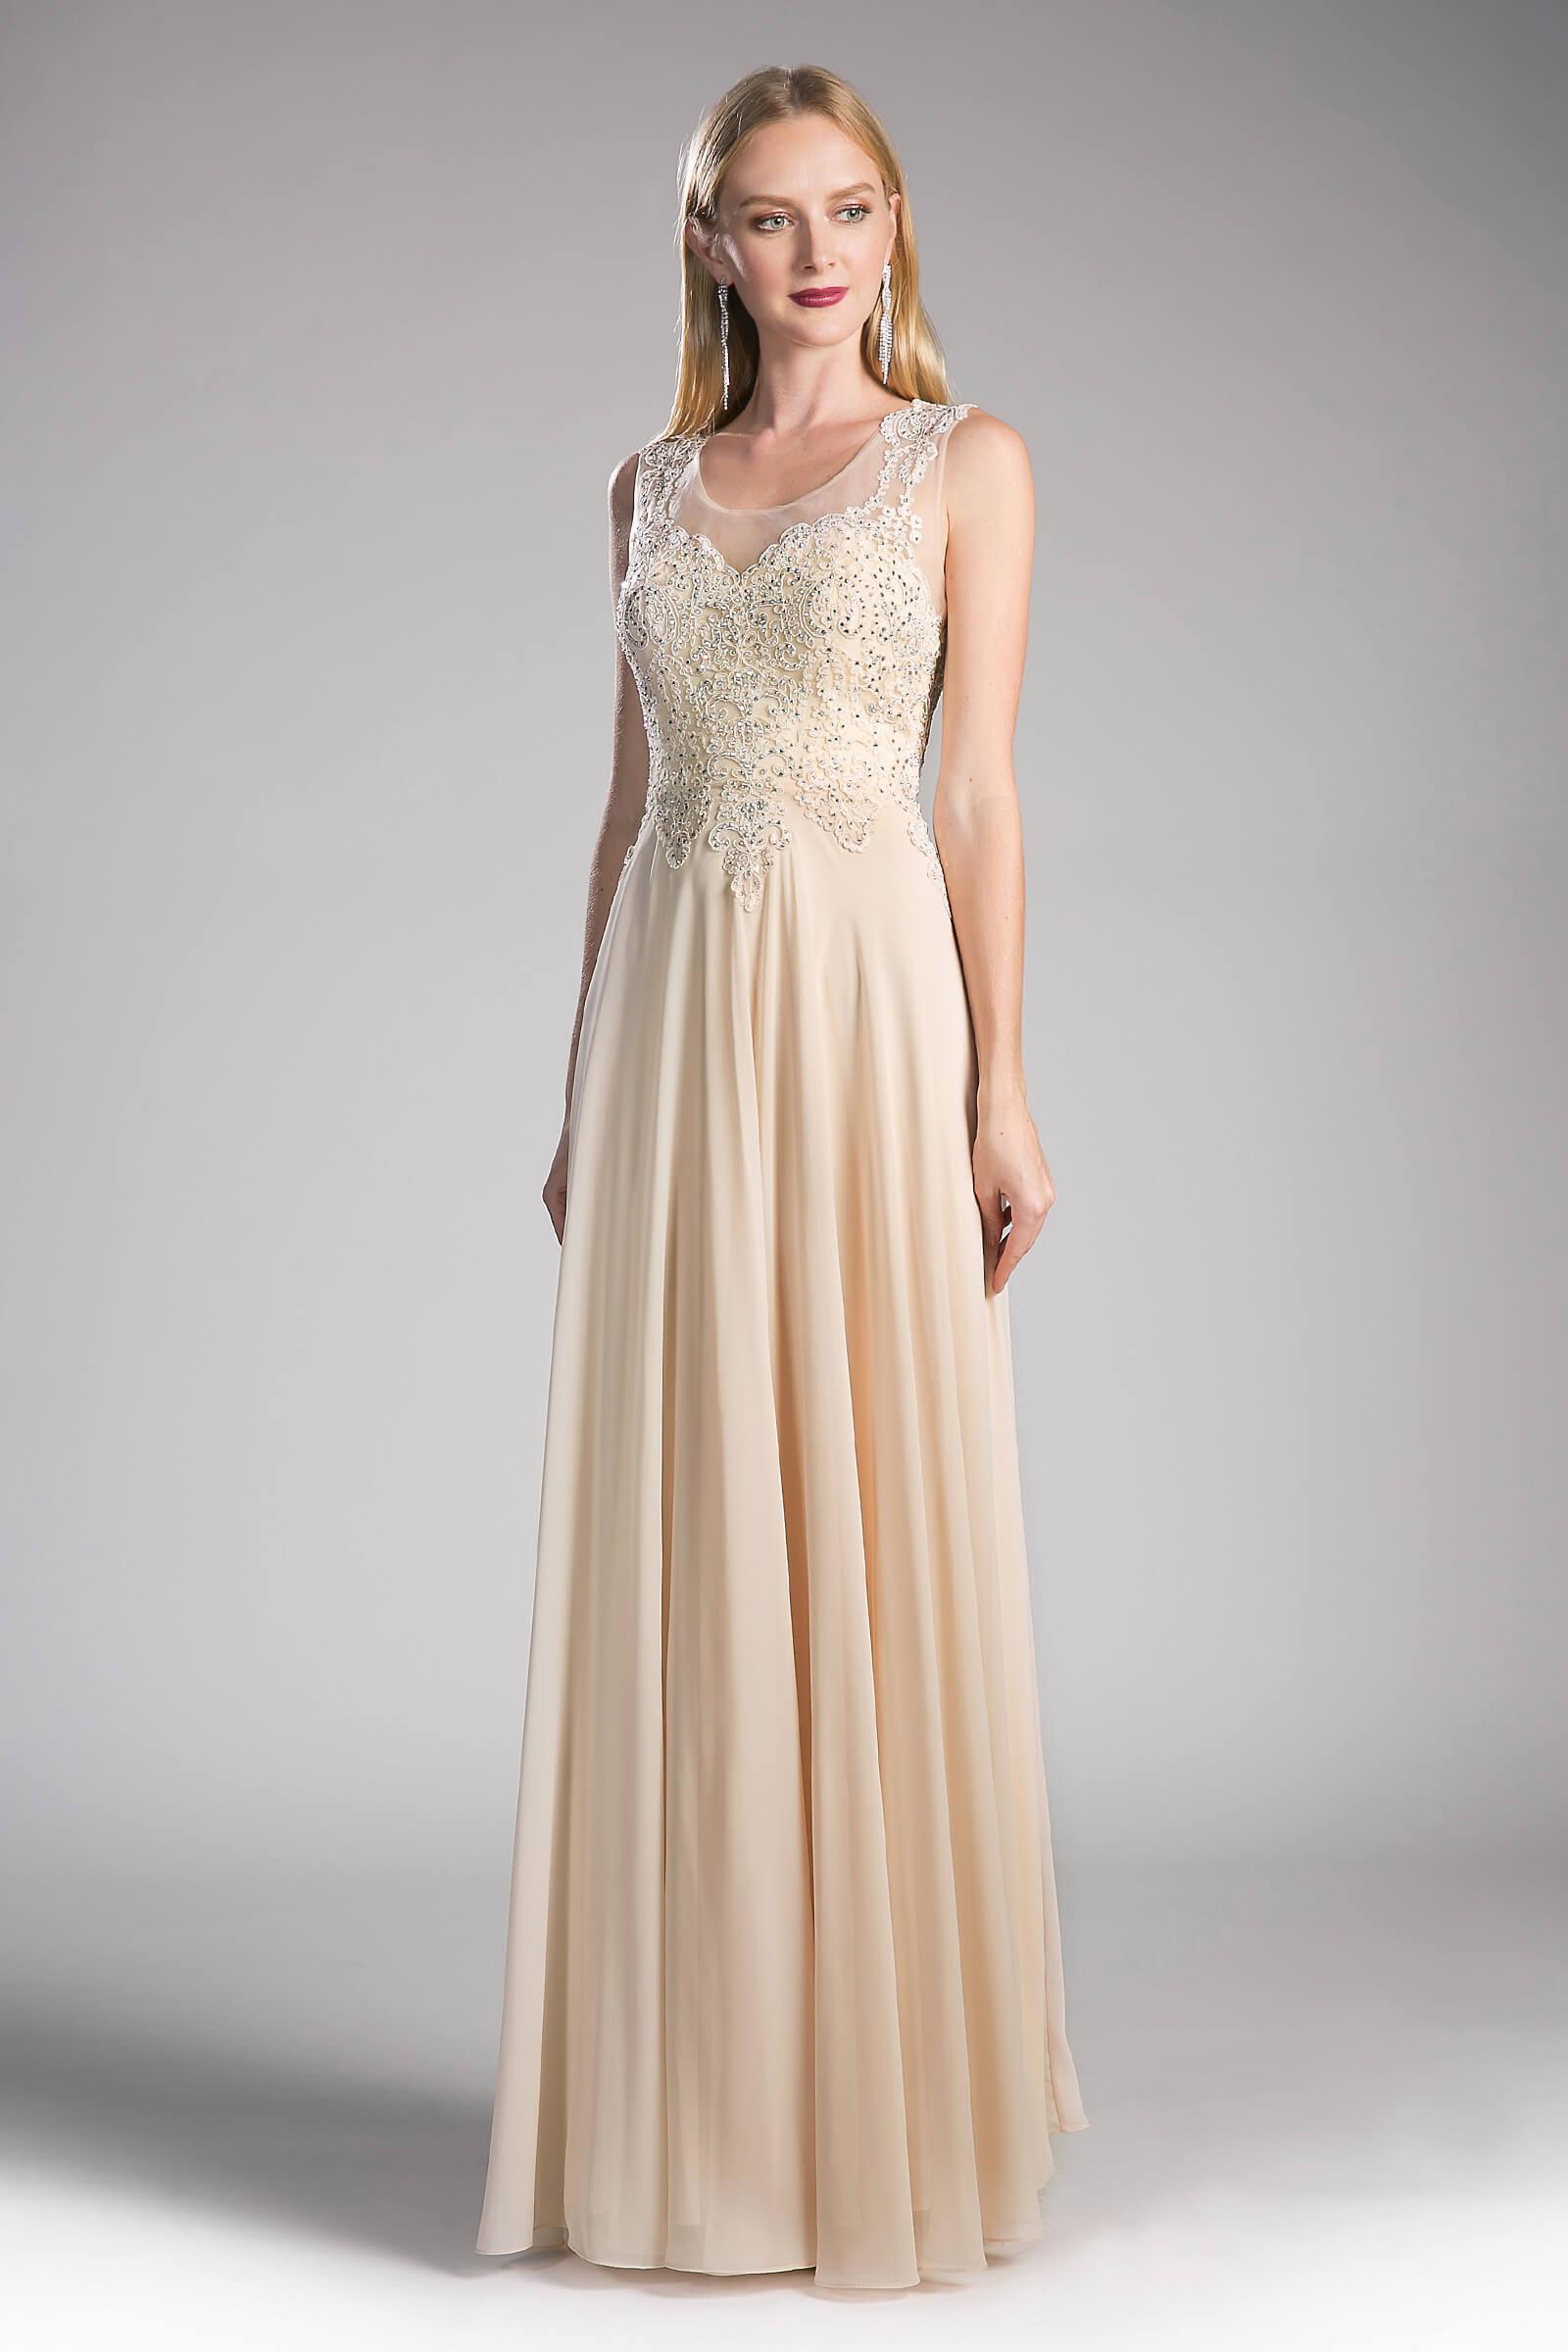 Long Jewel Embellished Formal Prom Gown Champagne